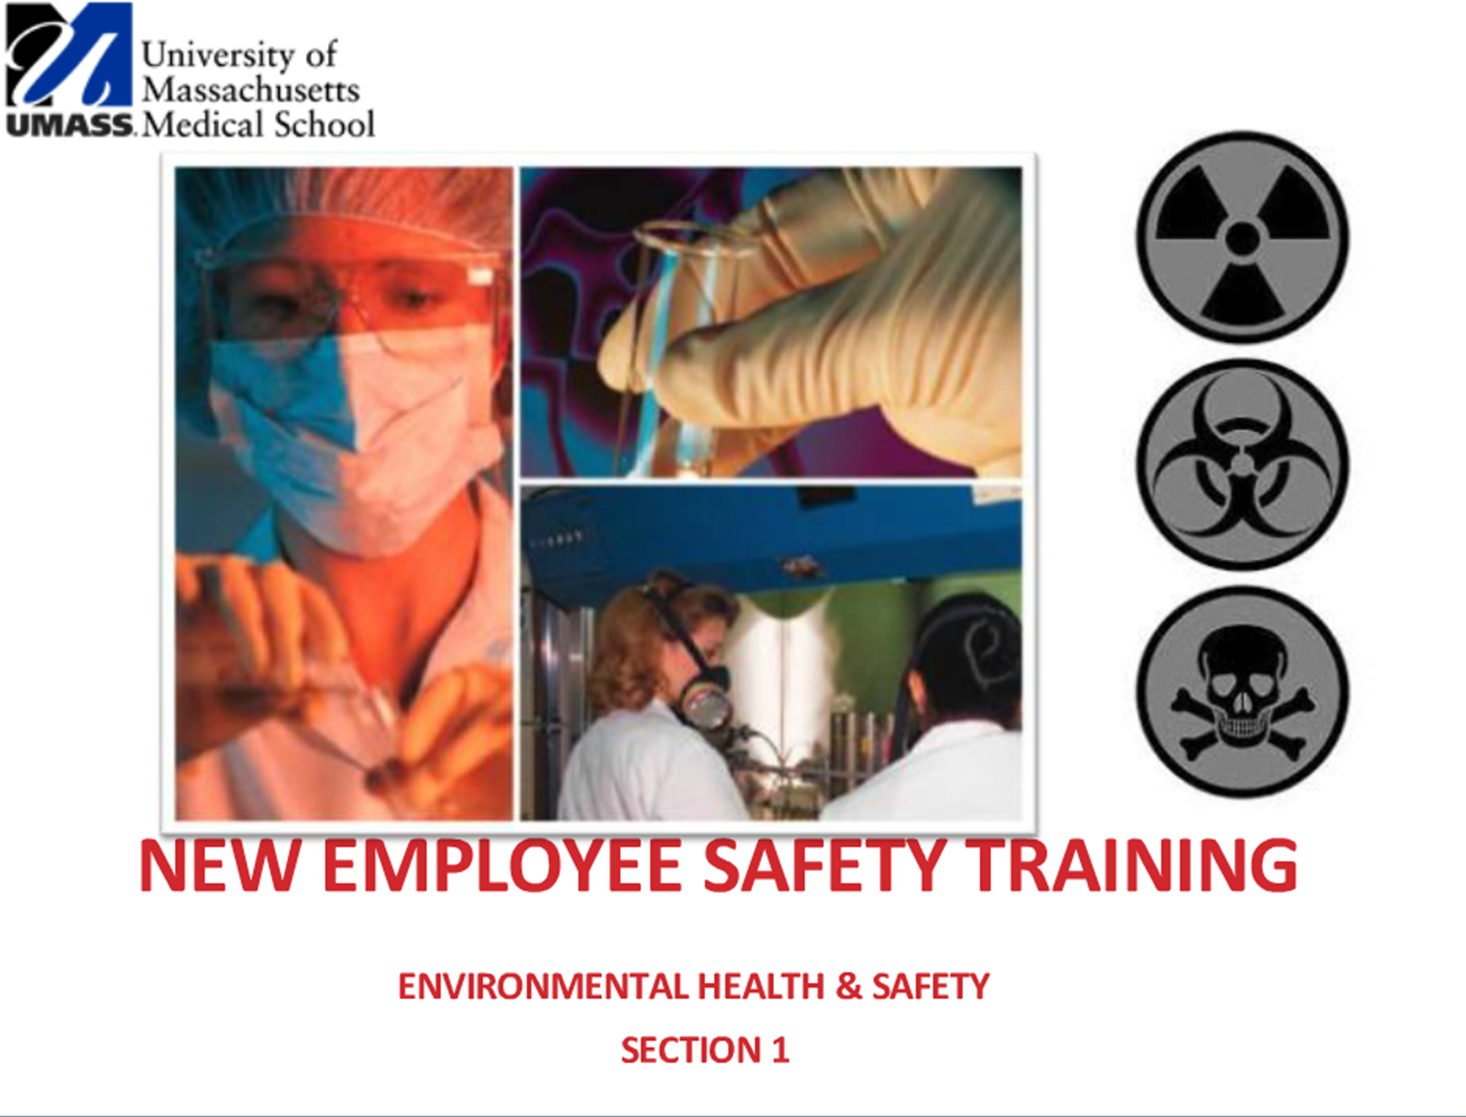 New Employee Safety Training Video